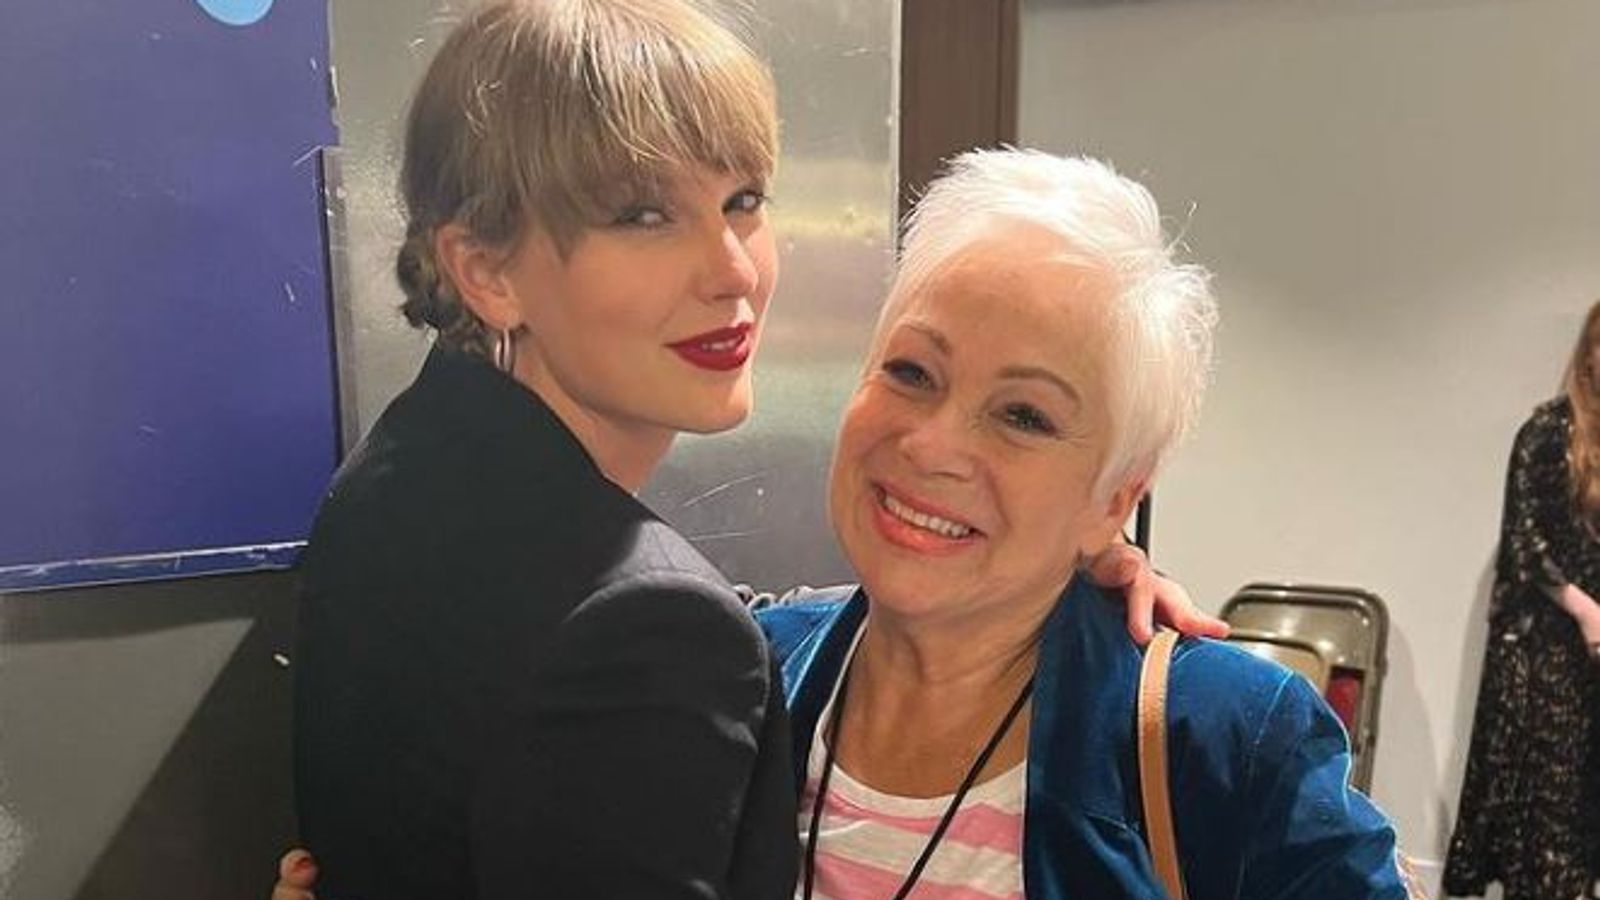 Taylor Swift fans highlight Denise Welch photo amid reports of relationship with The 1975's Matty Healy